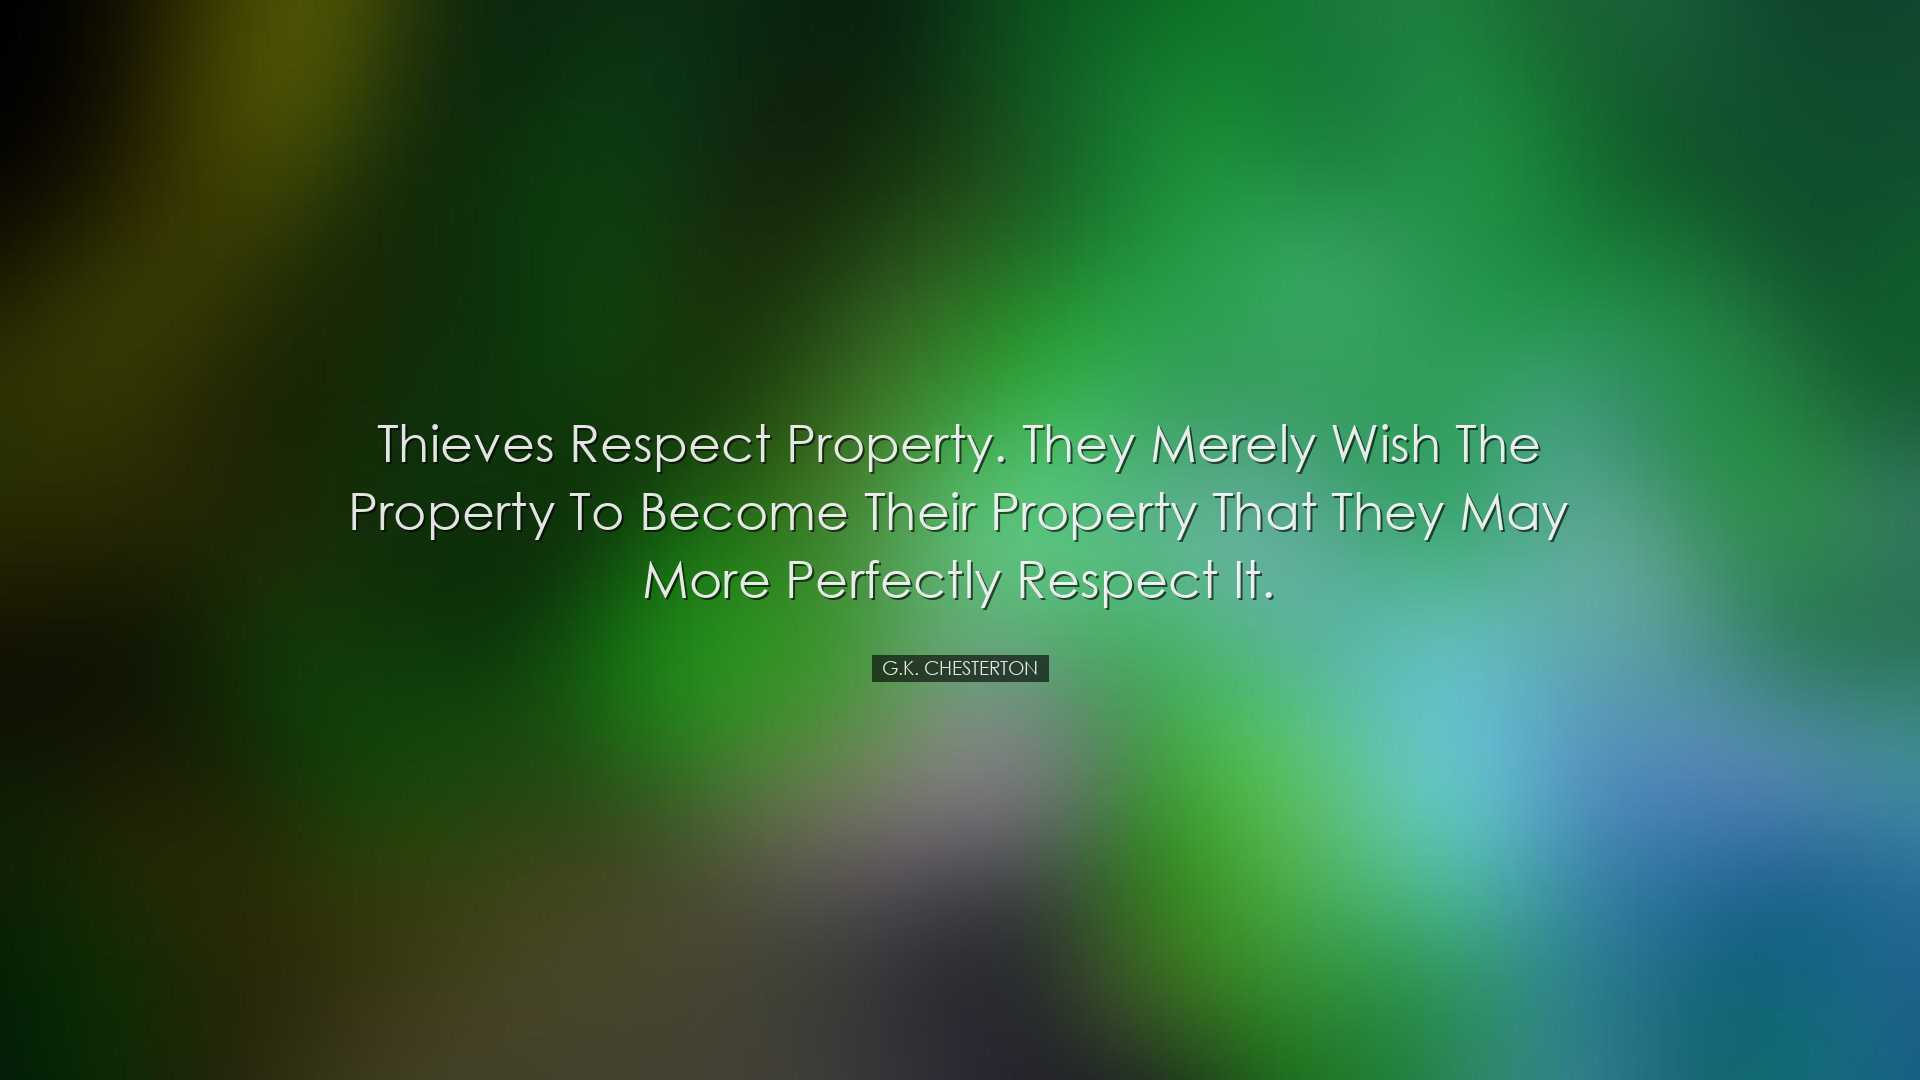 Thieves respect property. They merely wish the property to become